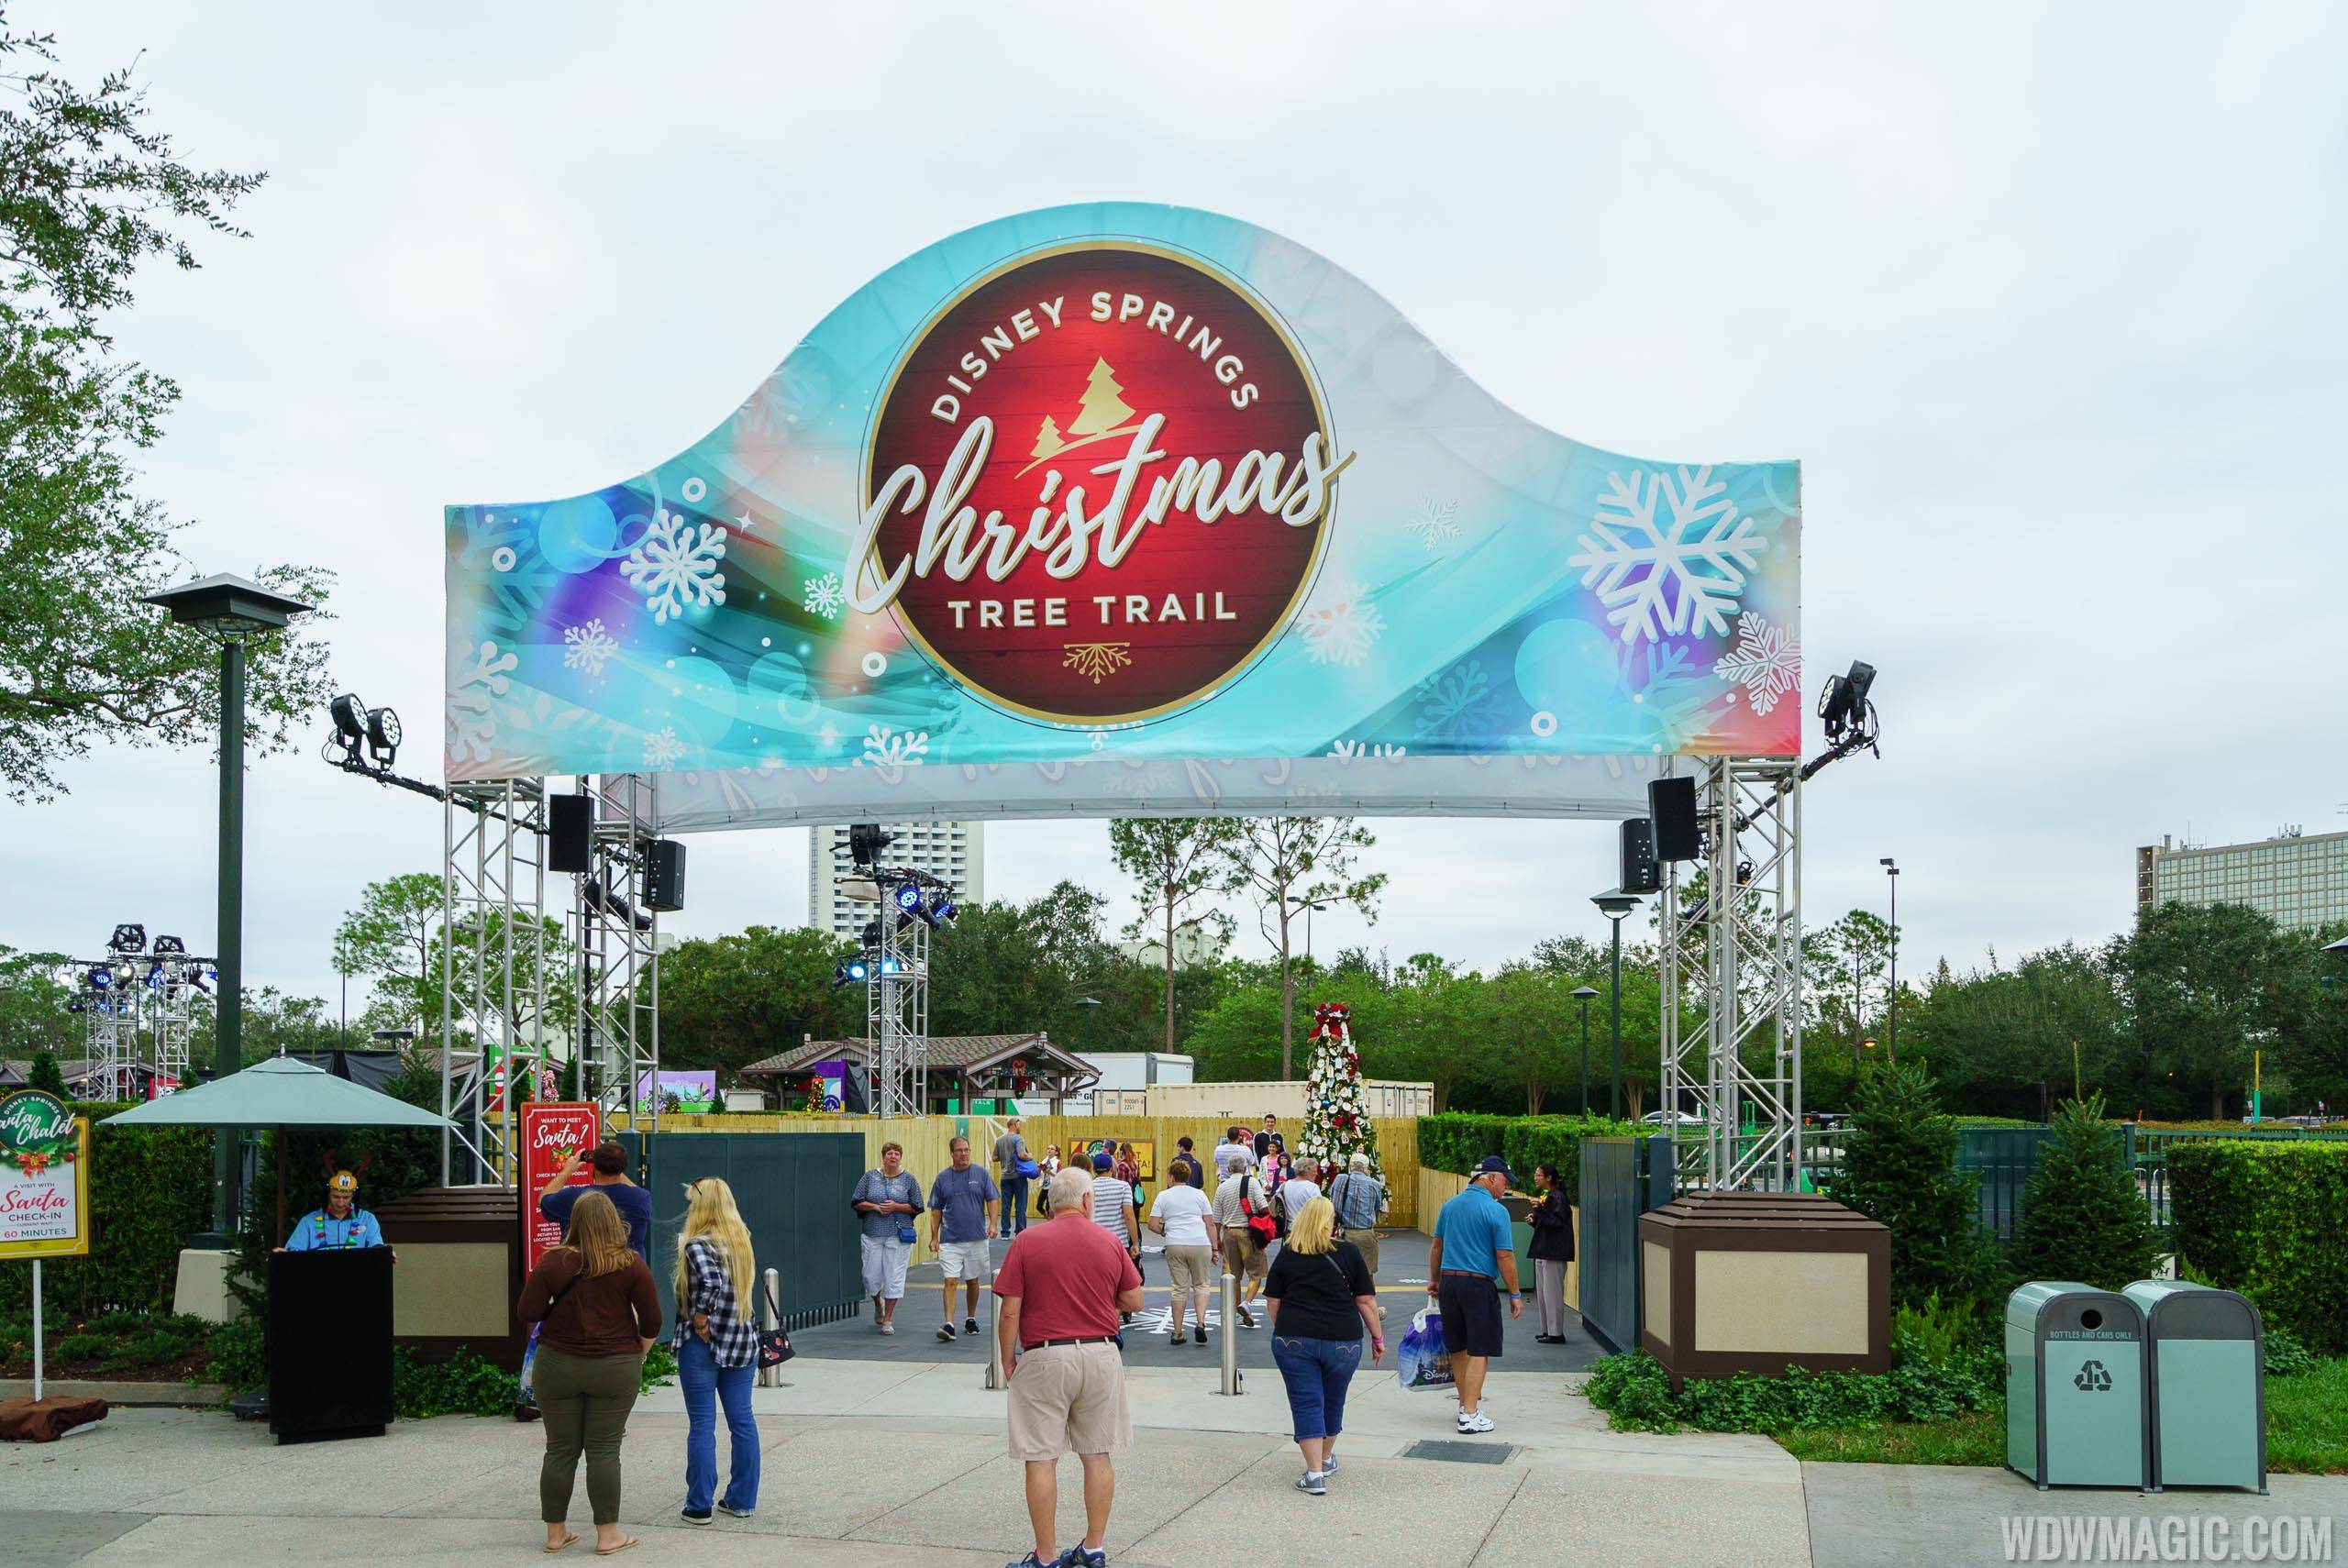 PHOTOS - Disney Springs expanded Christmas Tree Trail and new location for Santa's Chalet